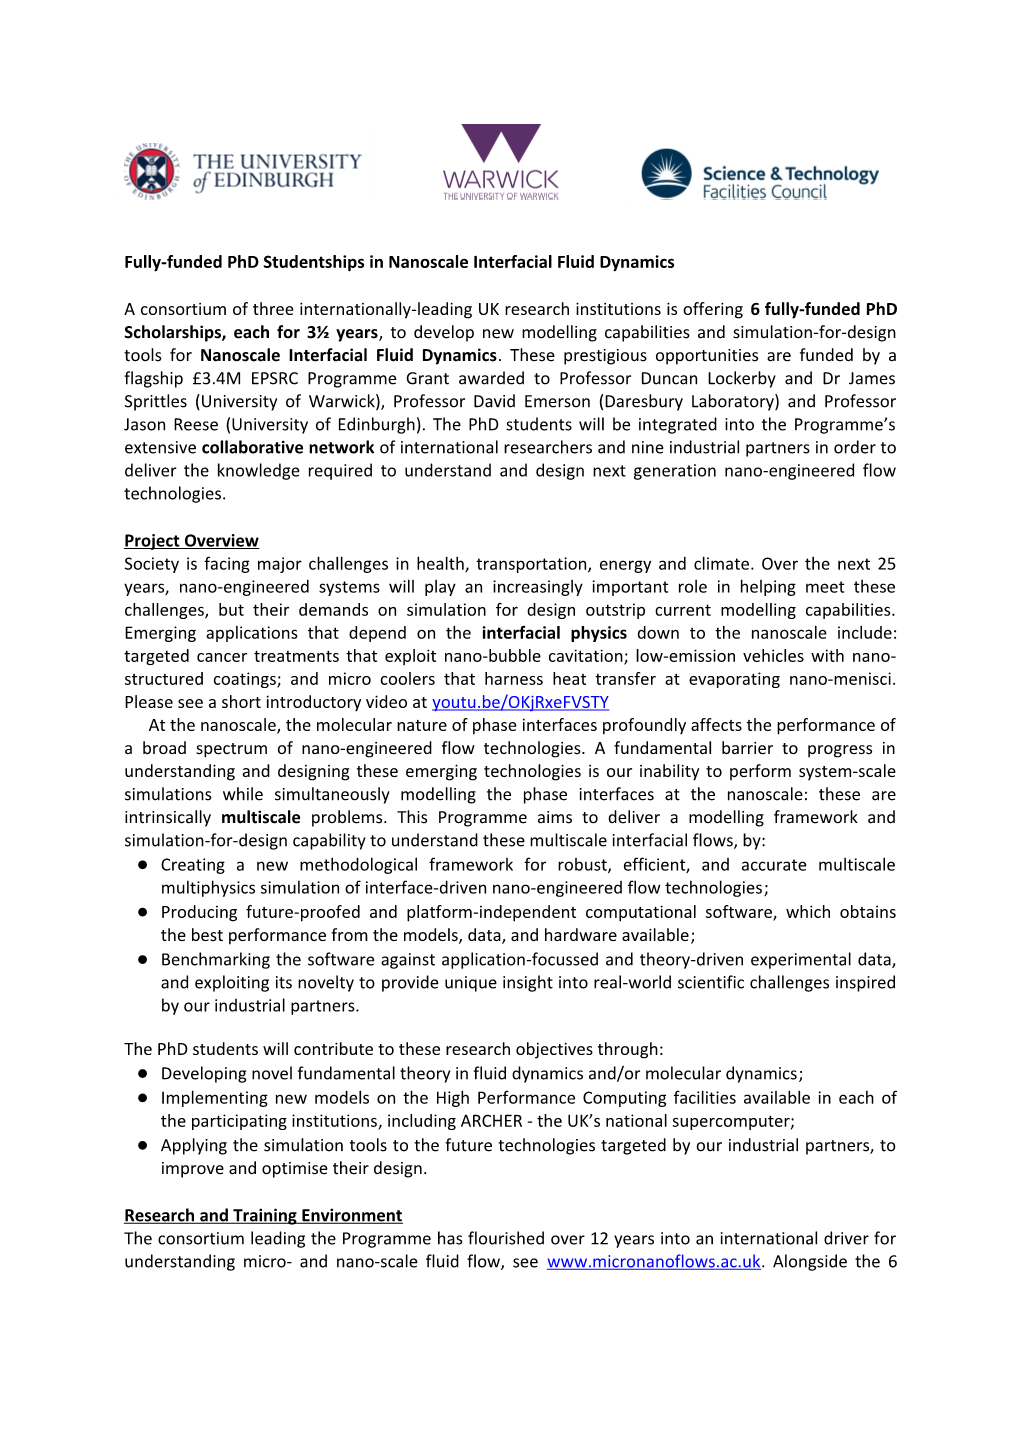 Fully-Funded Phd Studentships in Nanoscale Interfacial Fluid Dynamics